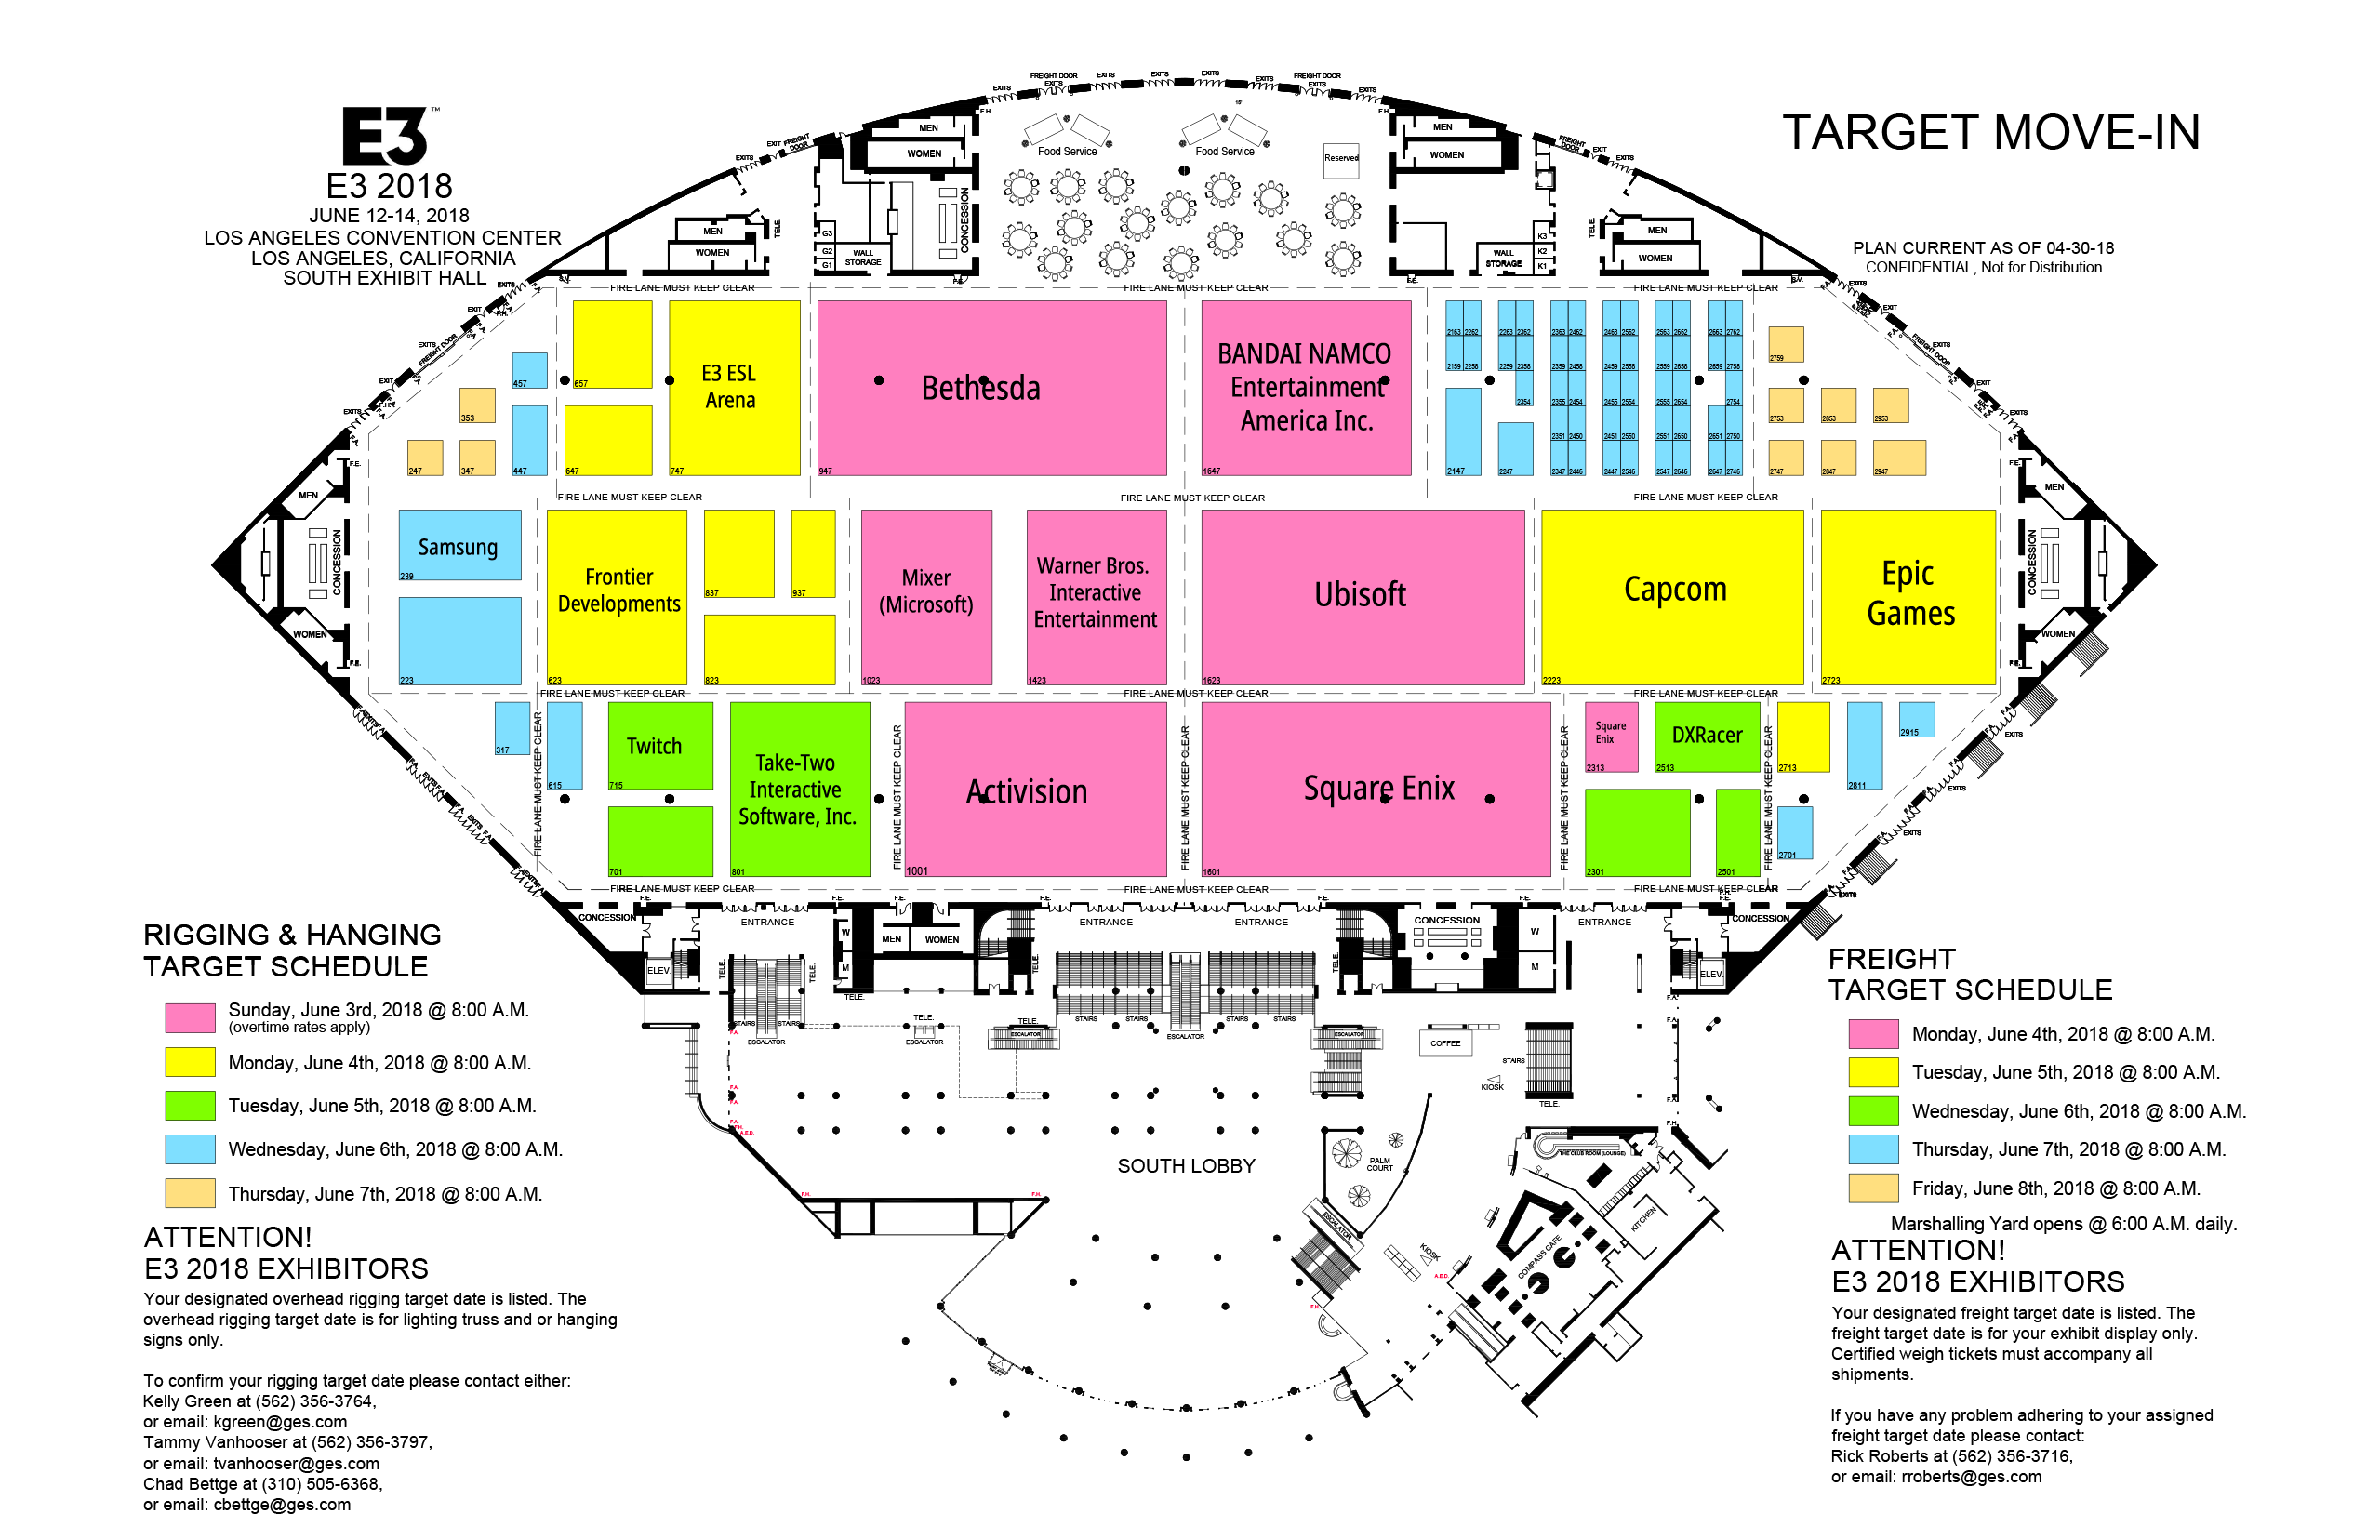 E3 2018 floor plans now available (target maps) ResetEra